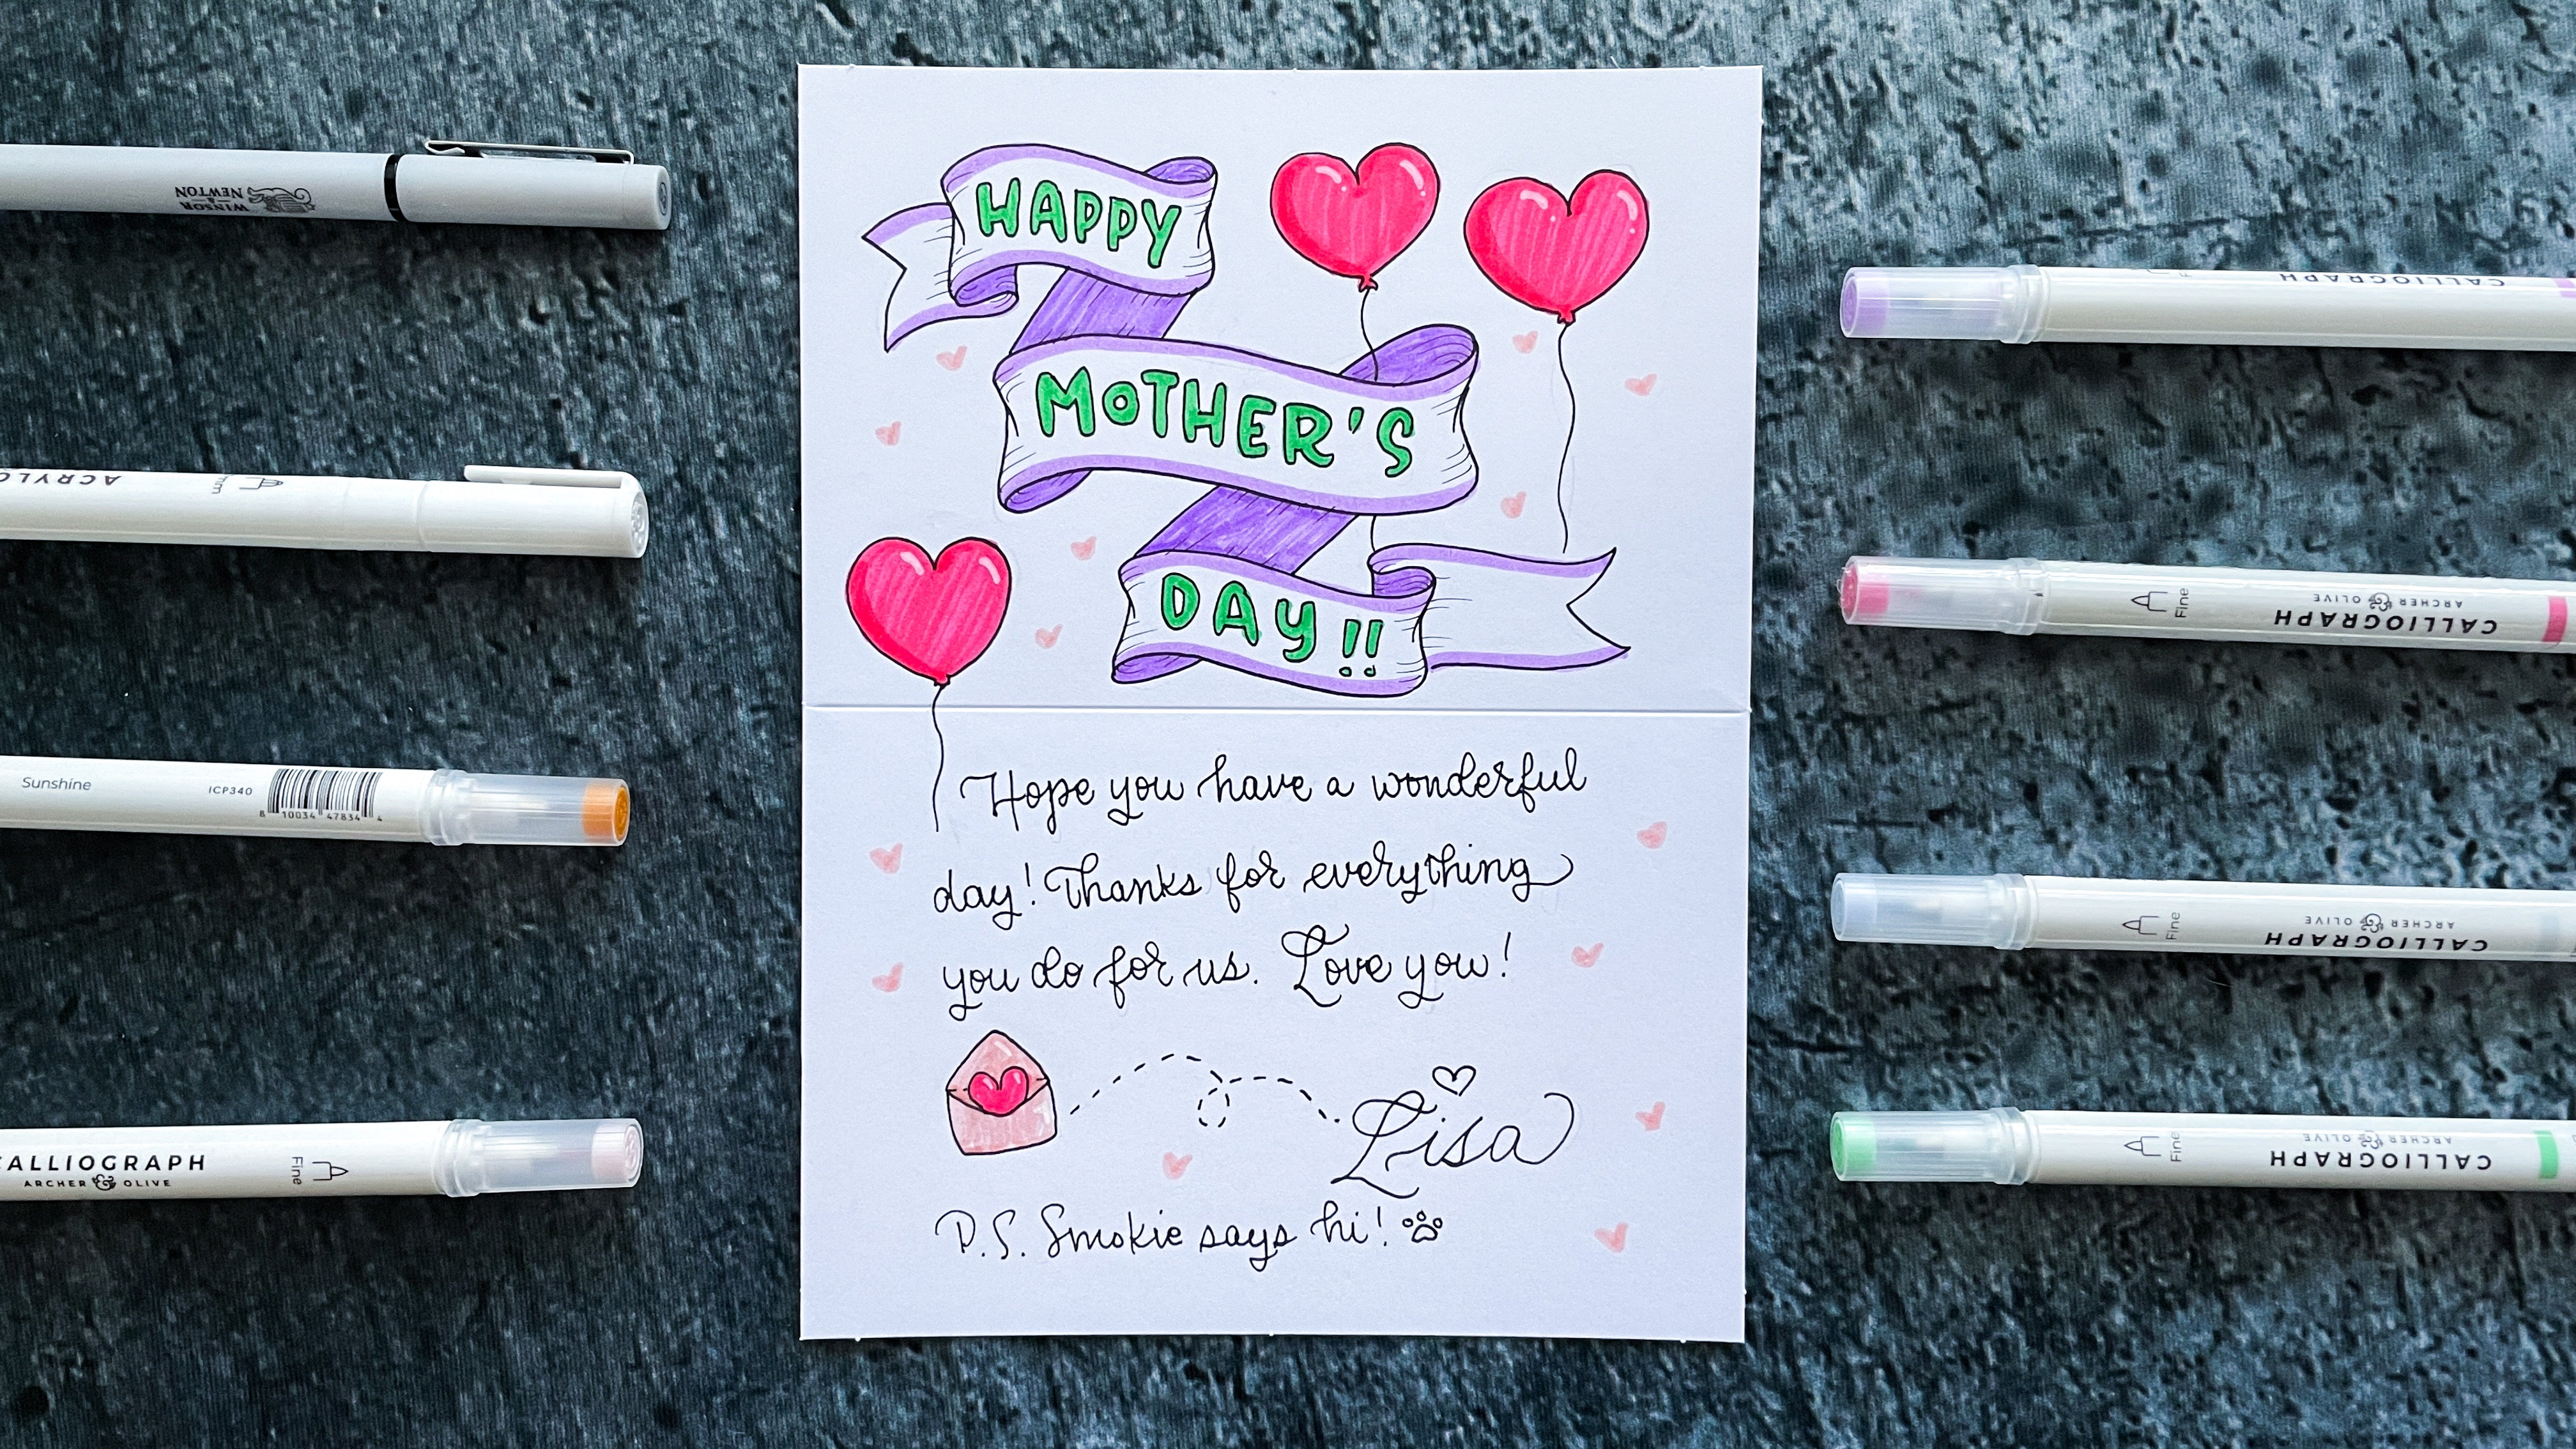 text of happy mother's day with message surrounded by heart doodles on cardstock surrounded by pens